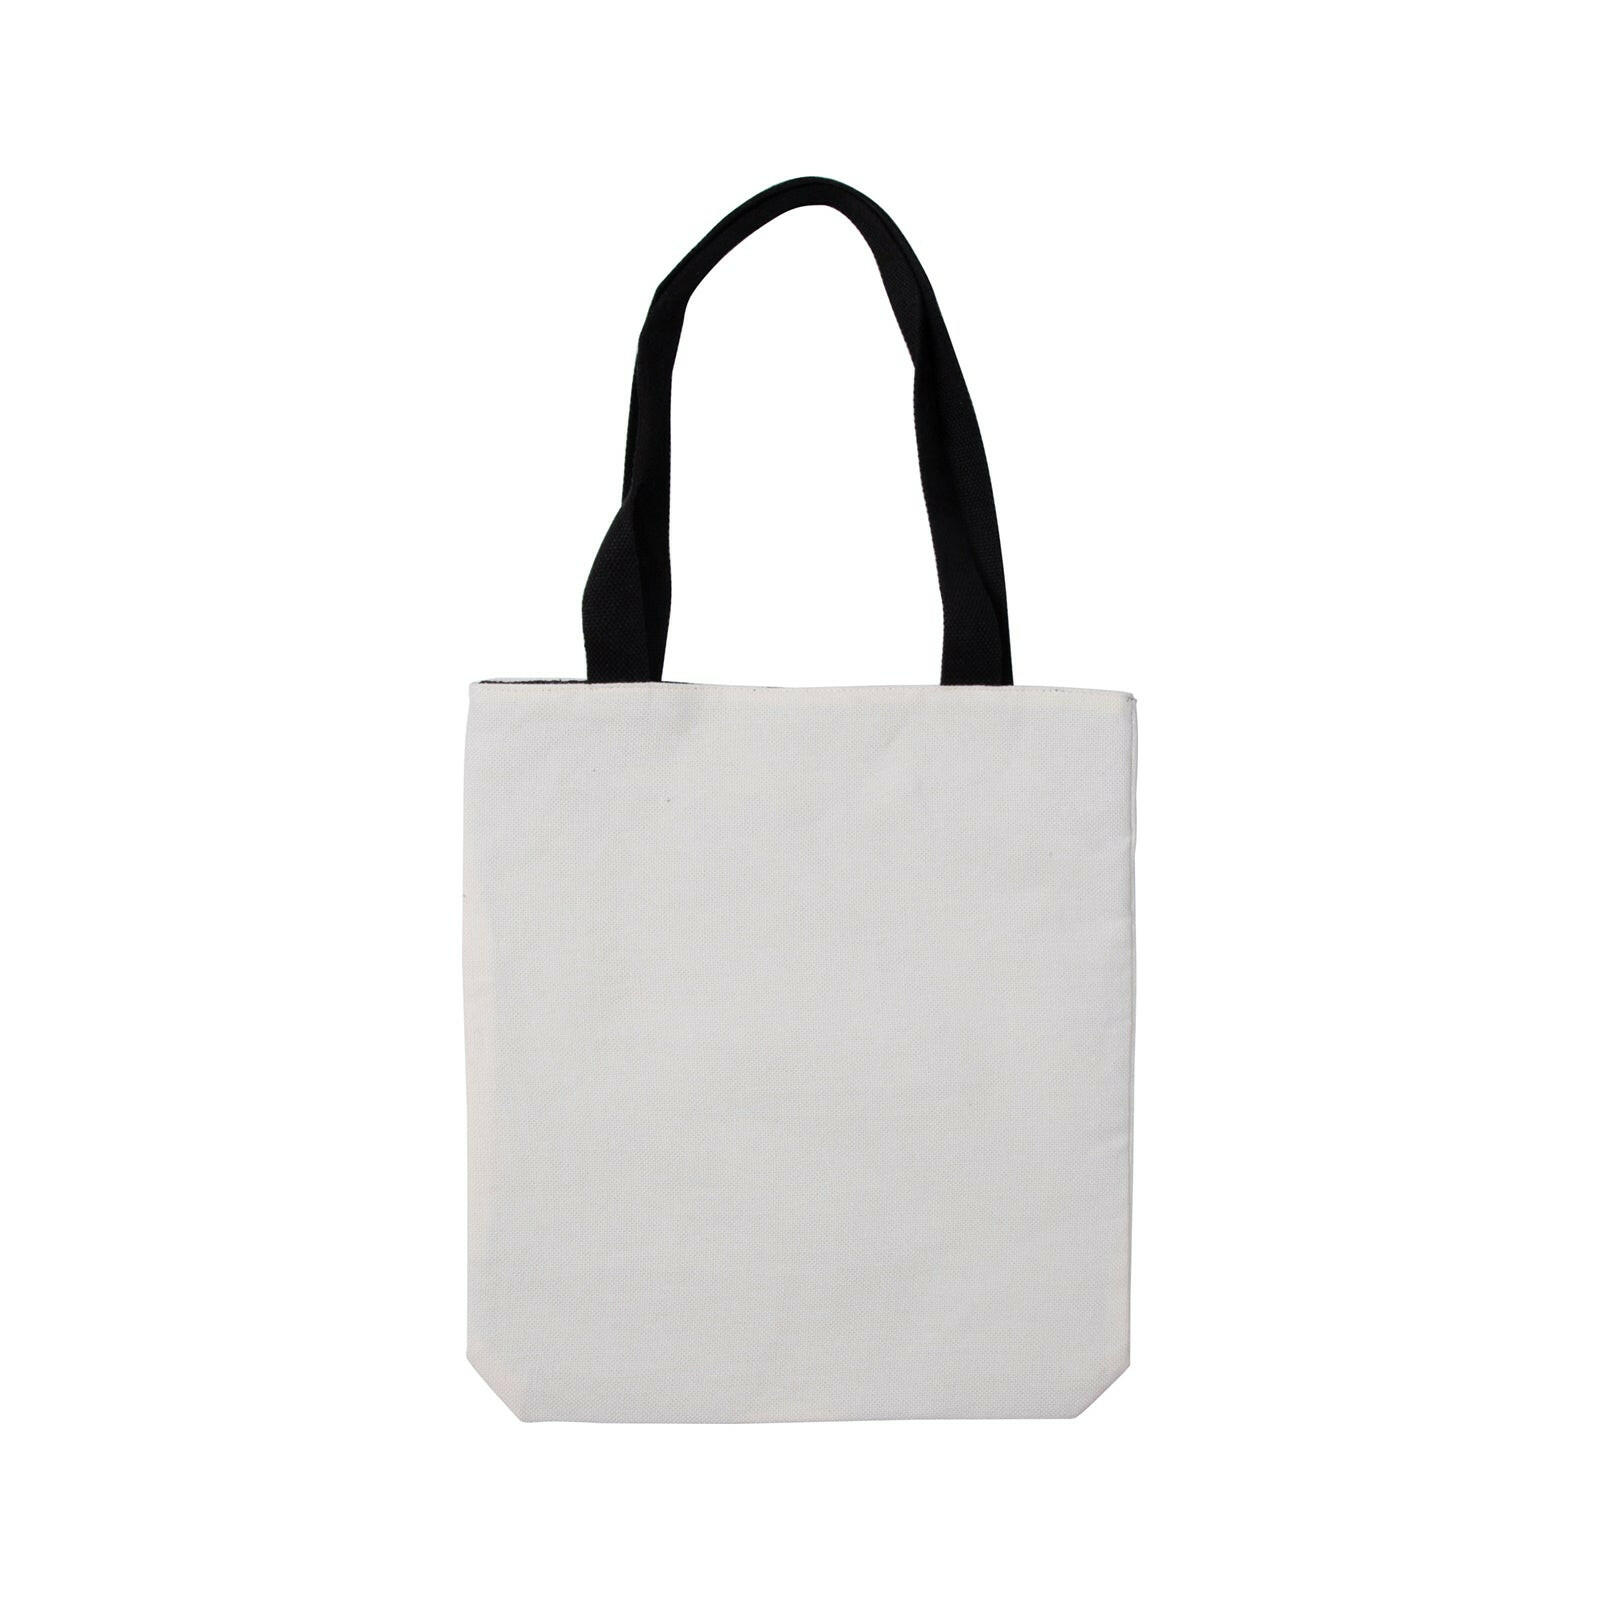 Linen Sublimation Tote Bags - 2 Pack.